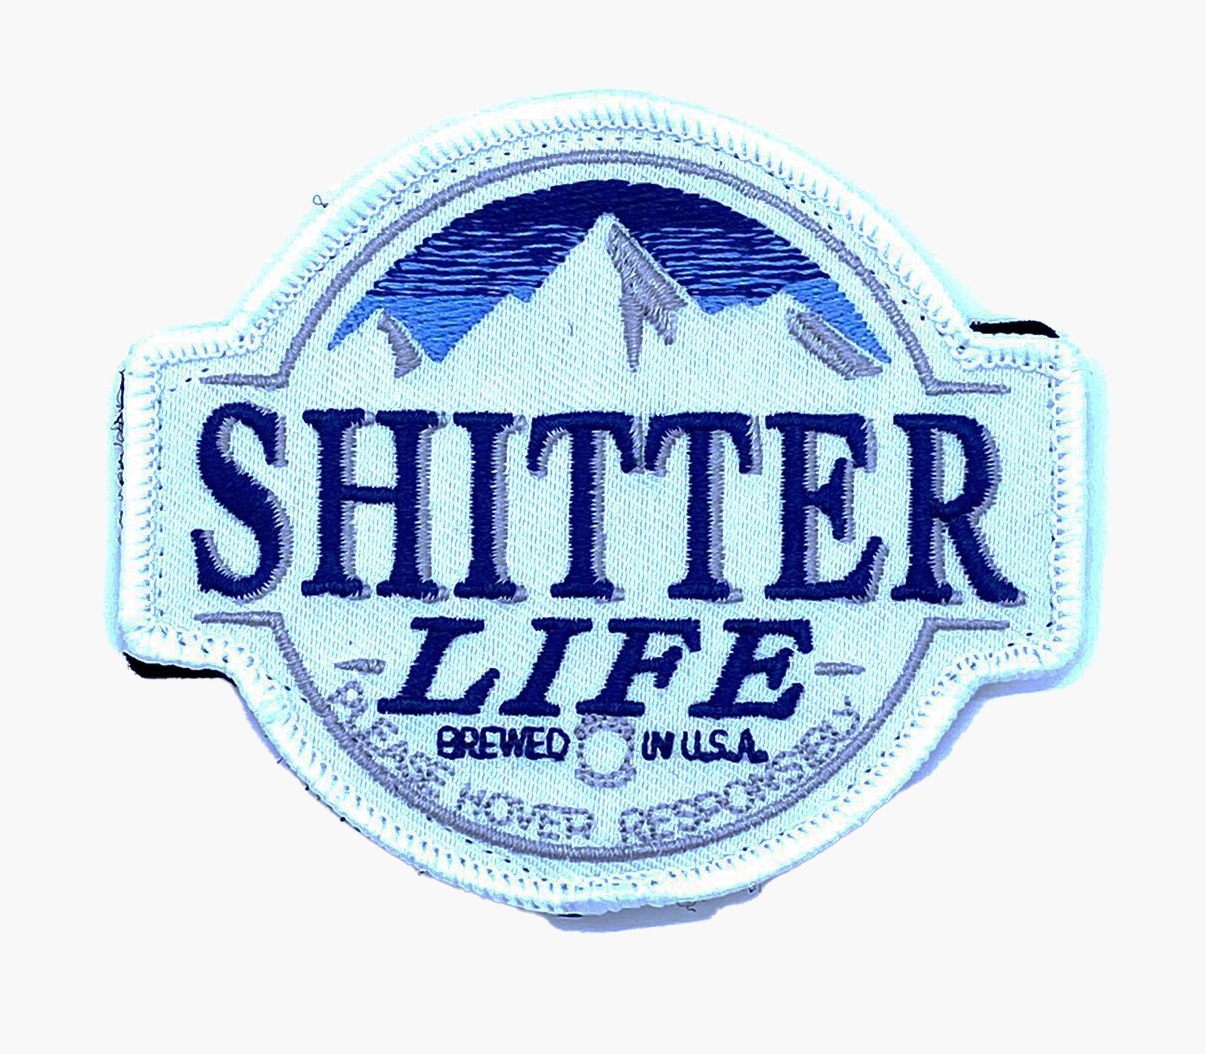 CH-53 Shitter Life Shoulder Patch – With Hook and Loop